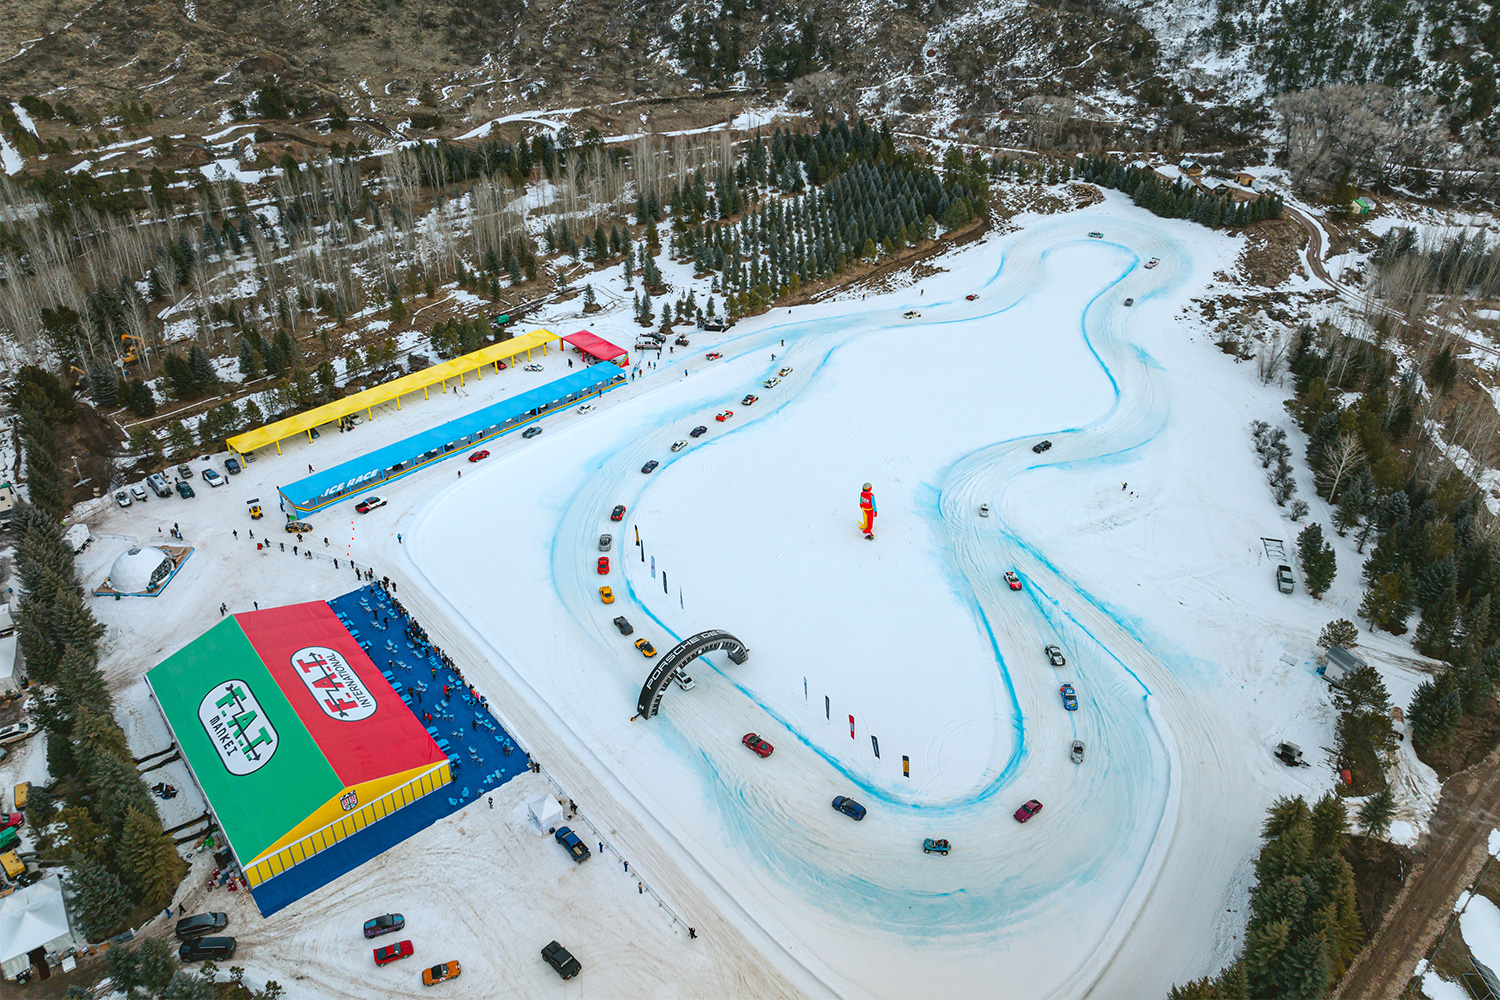 A drone shot of the ice track at the inaugural U.S. edition of the F.A.T. Ice Race in Aspen, Colorado